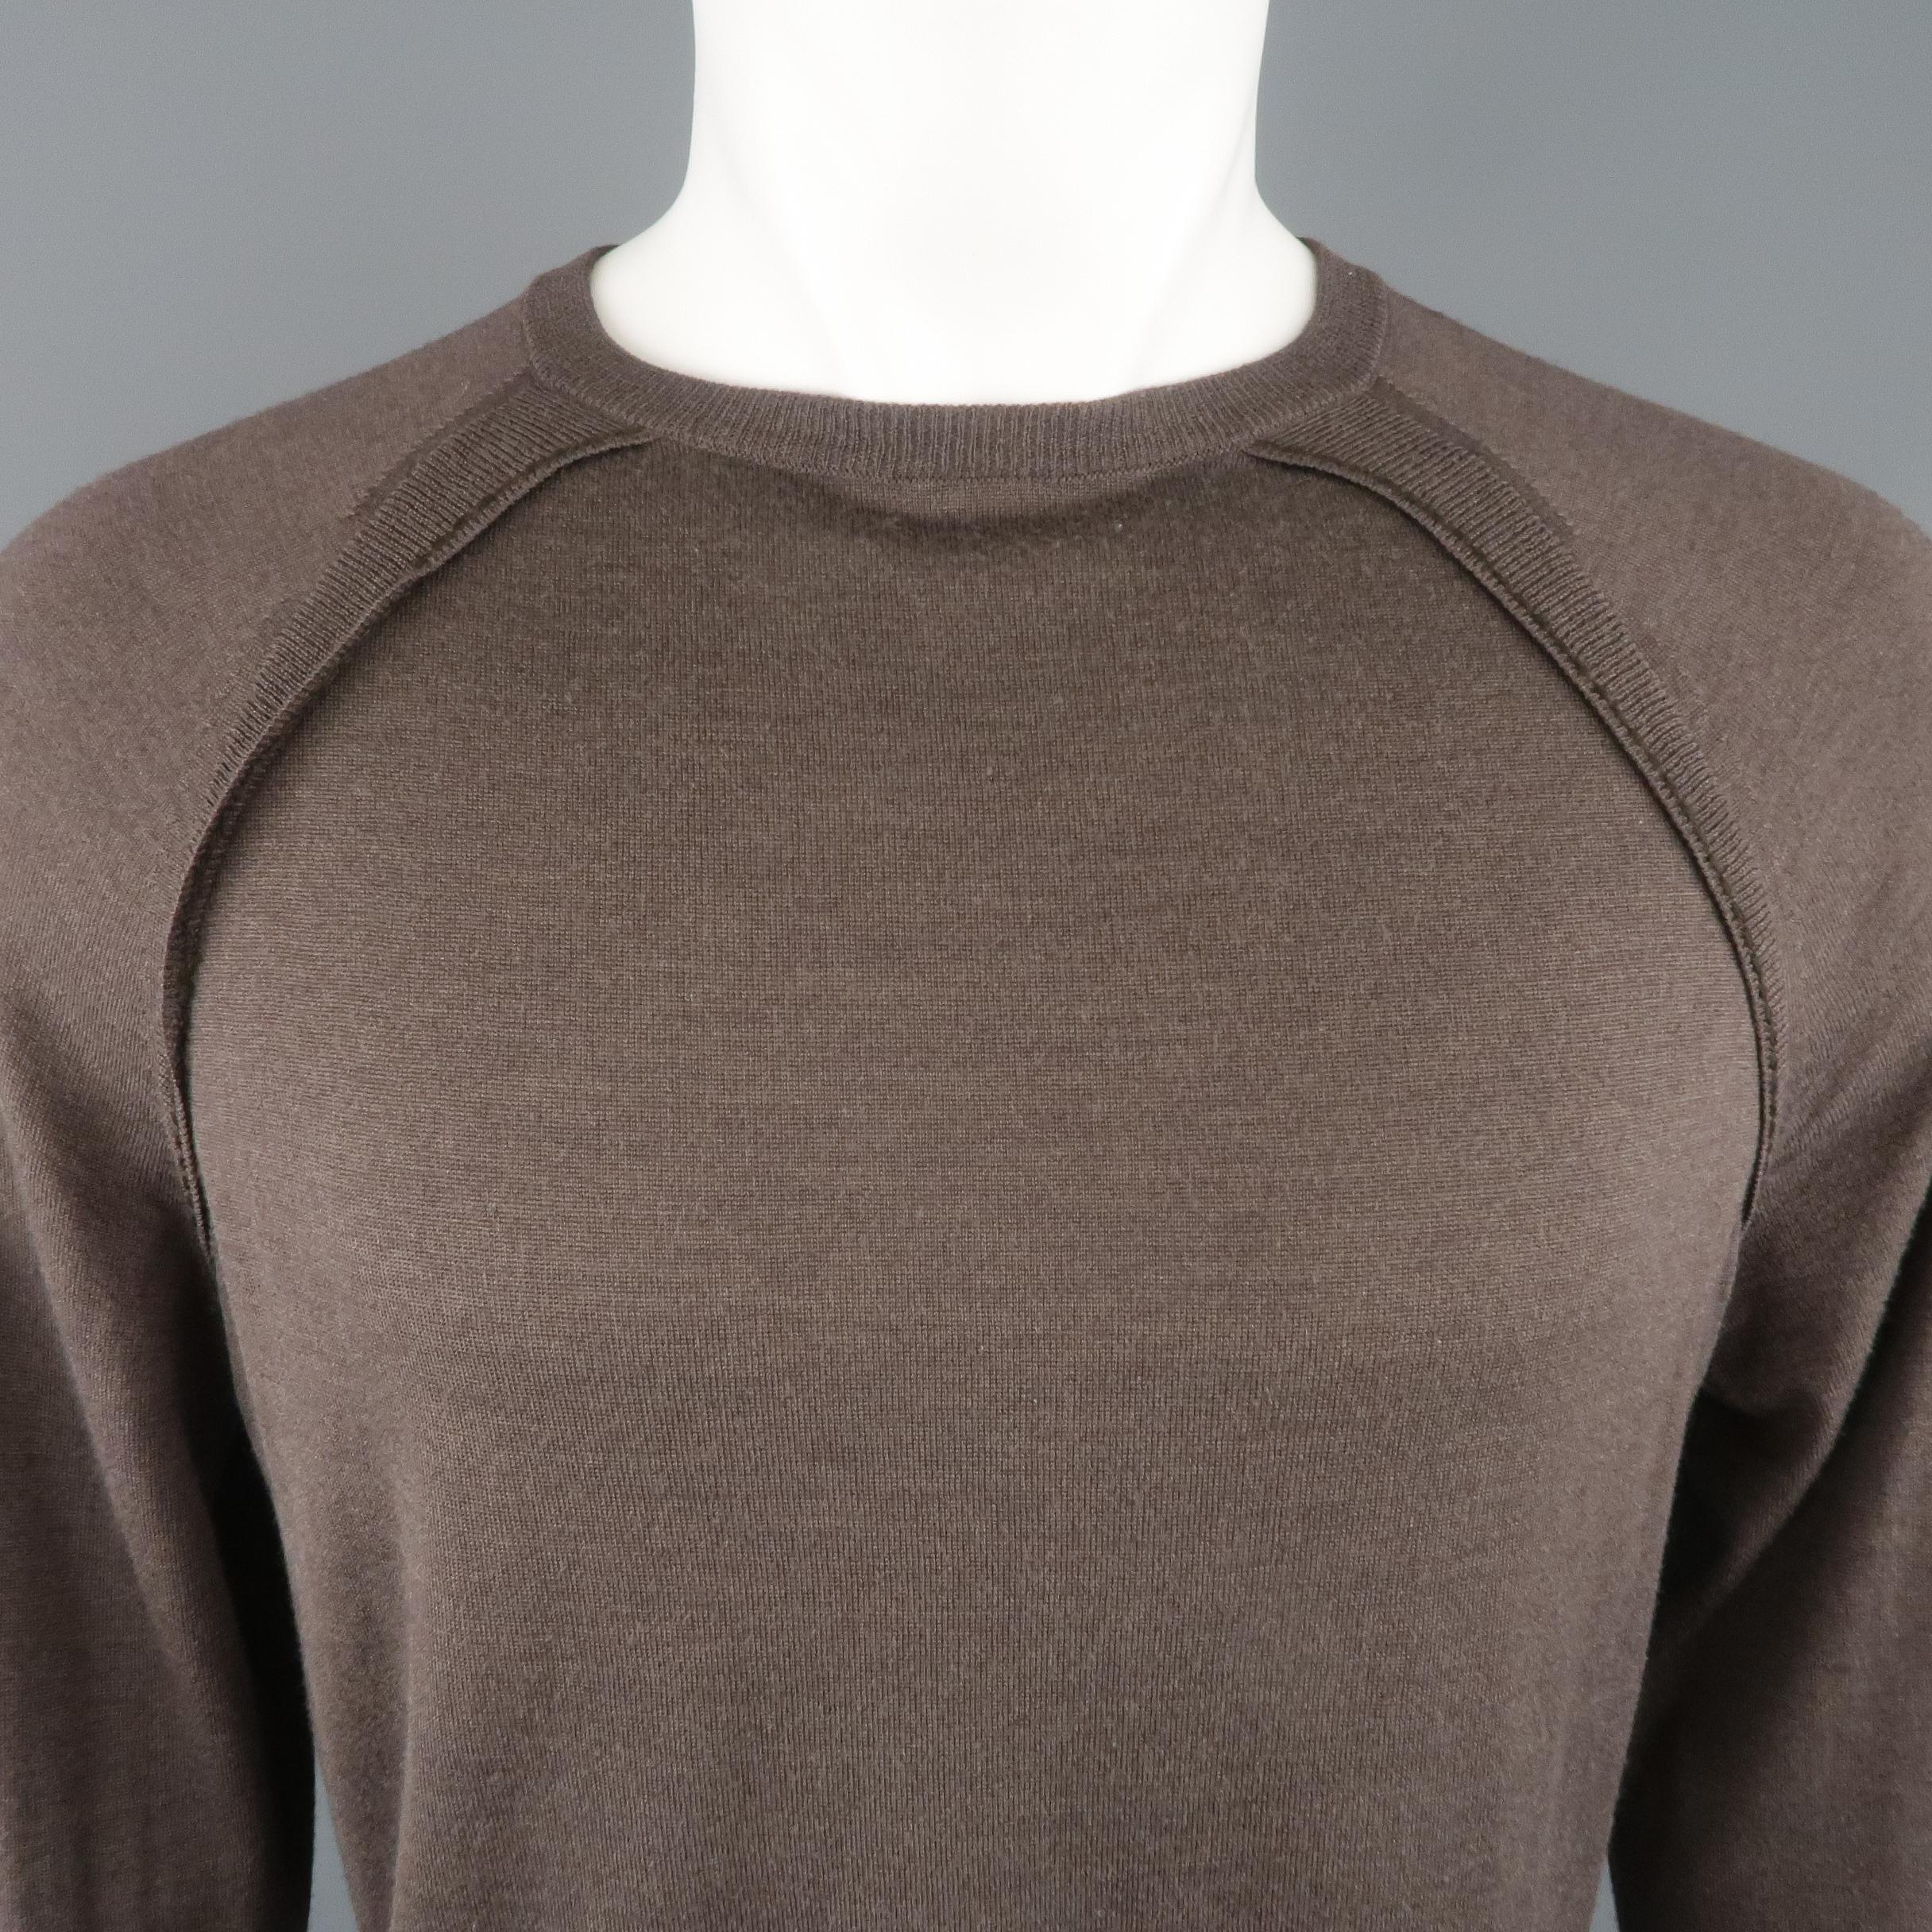 SALVATORE FERRAGAMO pullover sweater comes in taupe fine cashmere blend knit with a round neck, and raglan sleeves with overlay trim detail. Made in Italy.
 
Excellent Pre-Owned Condition.
Marked: M
 
Measurements:
 
Shoulder: 17 in.
Chest: 42